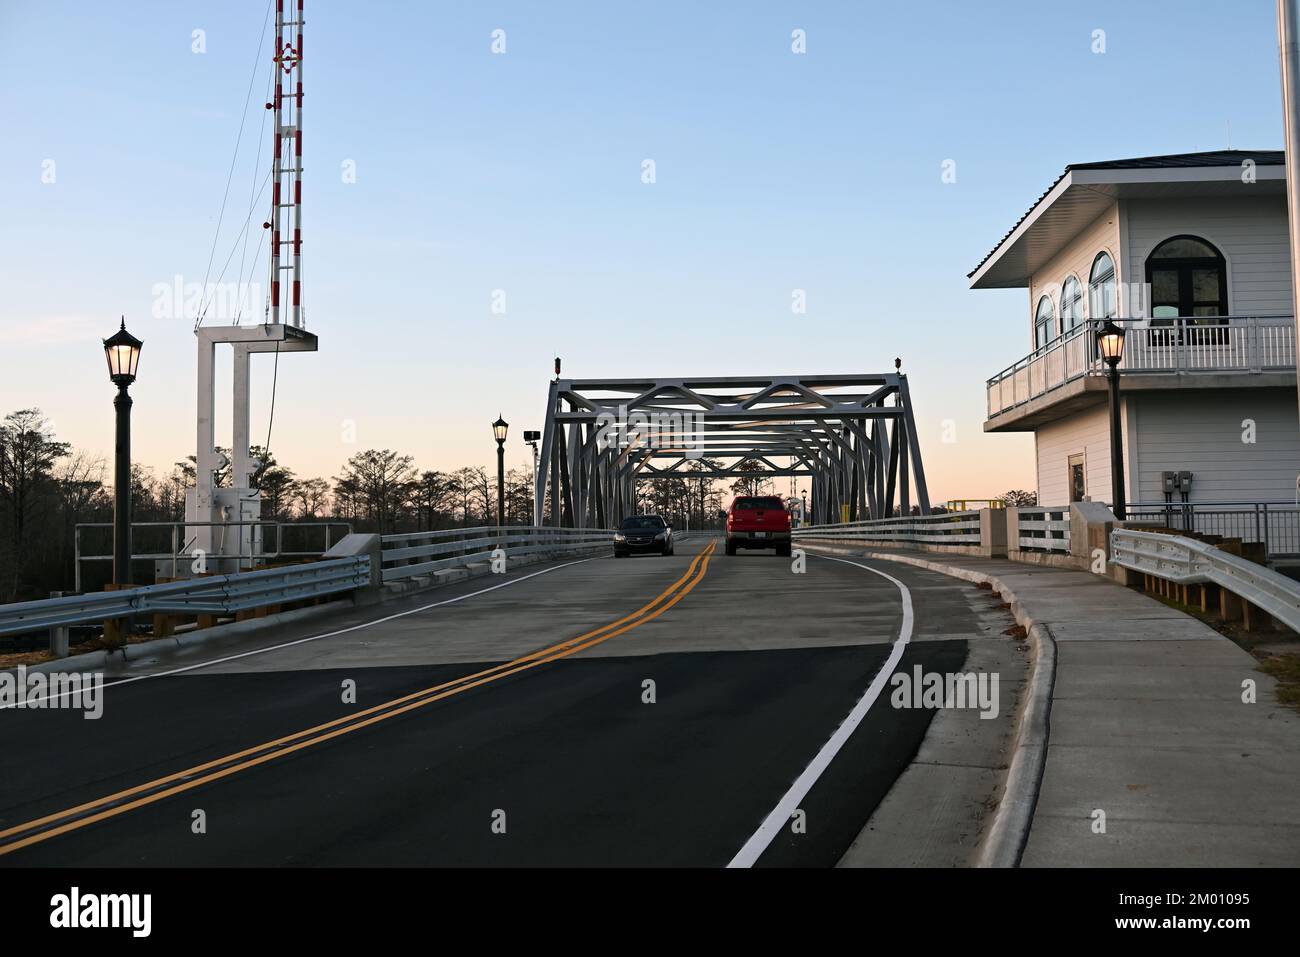 The approach to the new steel swing steel trestle 'Sky Bridge' over the Perquimans River at the edge of town in Hertford, North Carolina Stock Photo